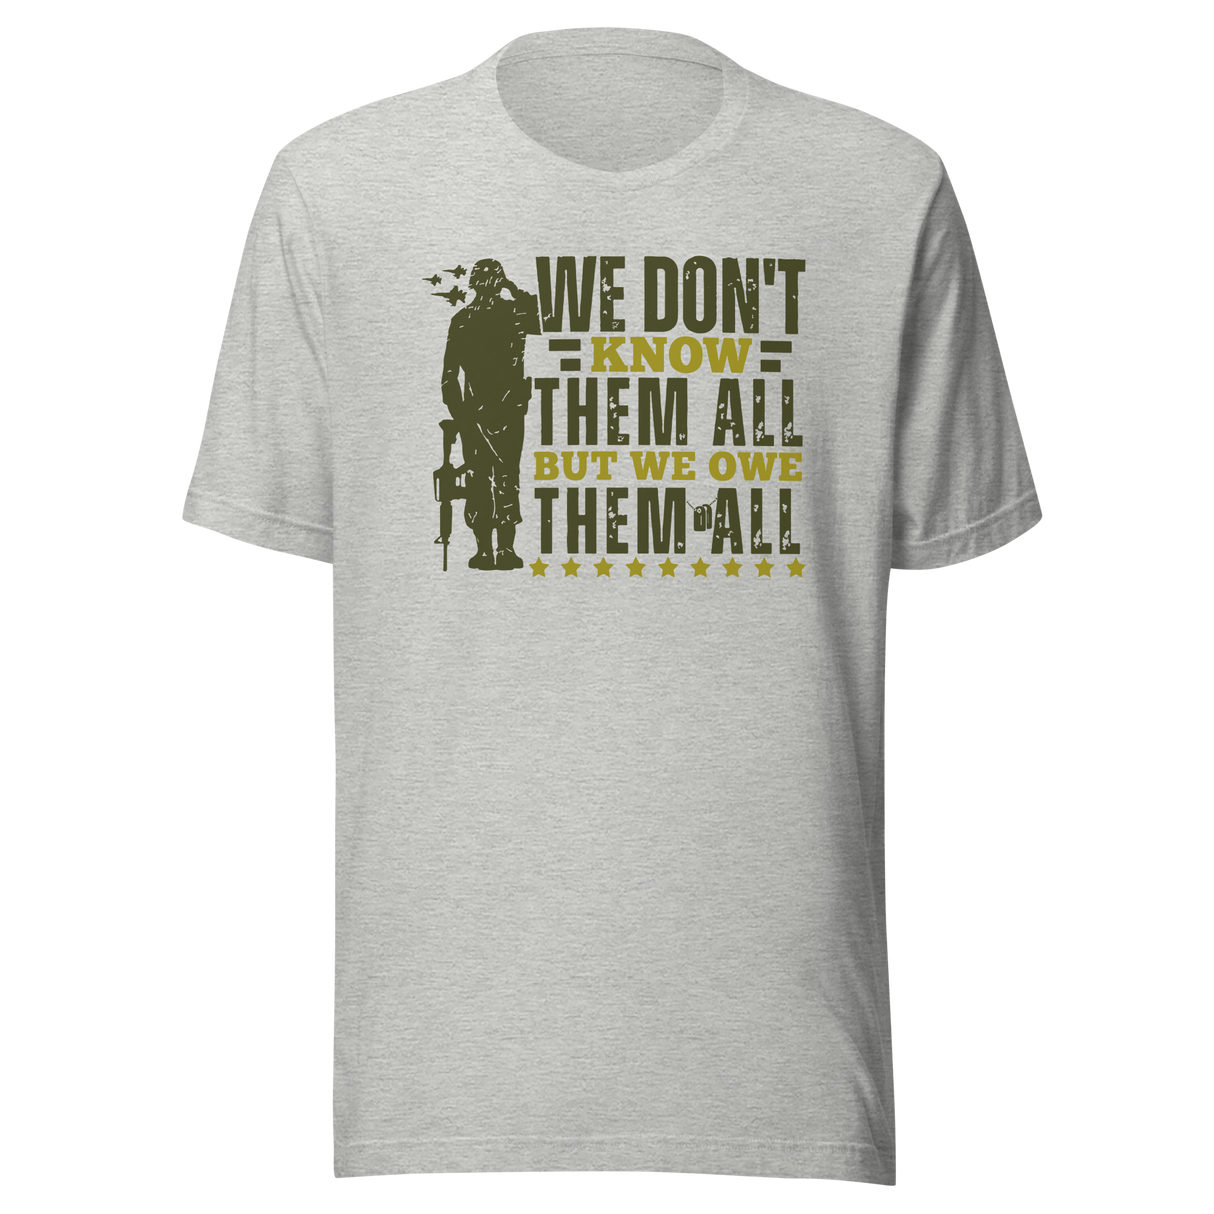 we-dont-know-them-all-but-owe-them-all-government-tee-veteran-t-shirt-government-tee-tribute-t-shirt-respect-tee#color_athletic-heather